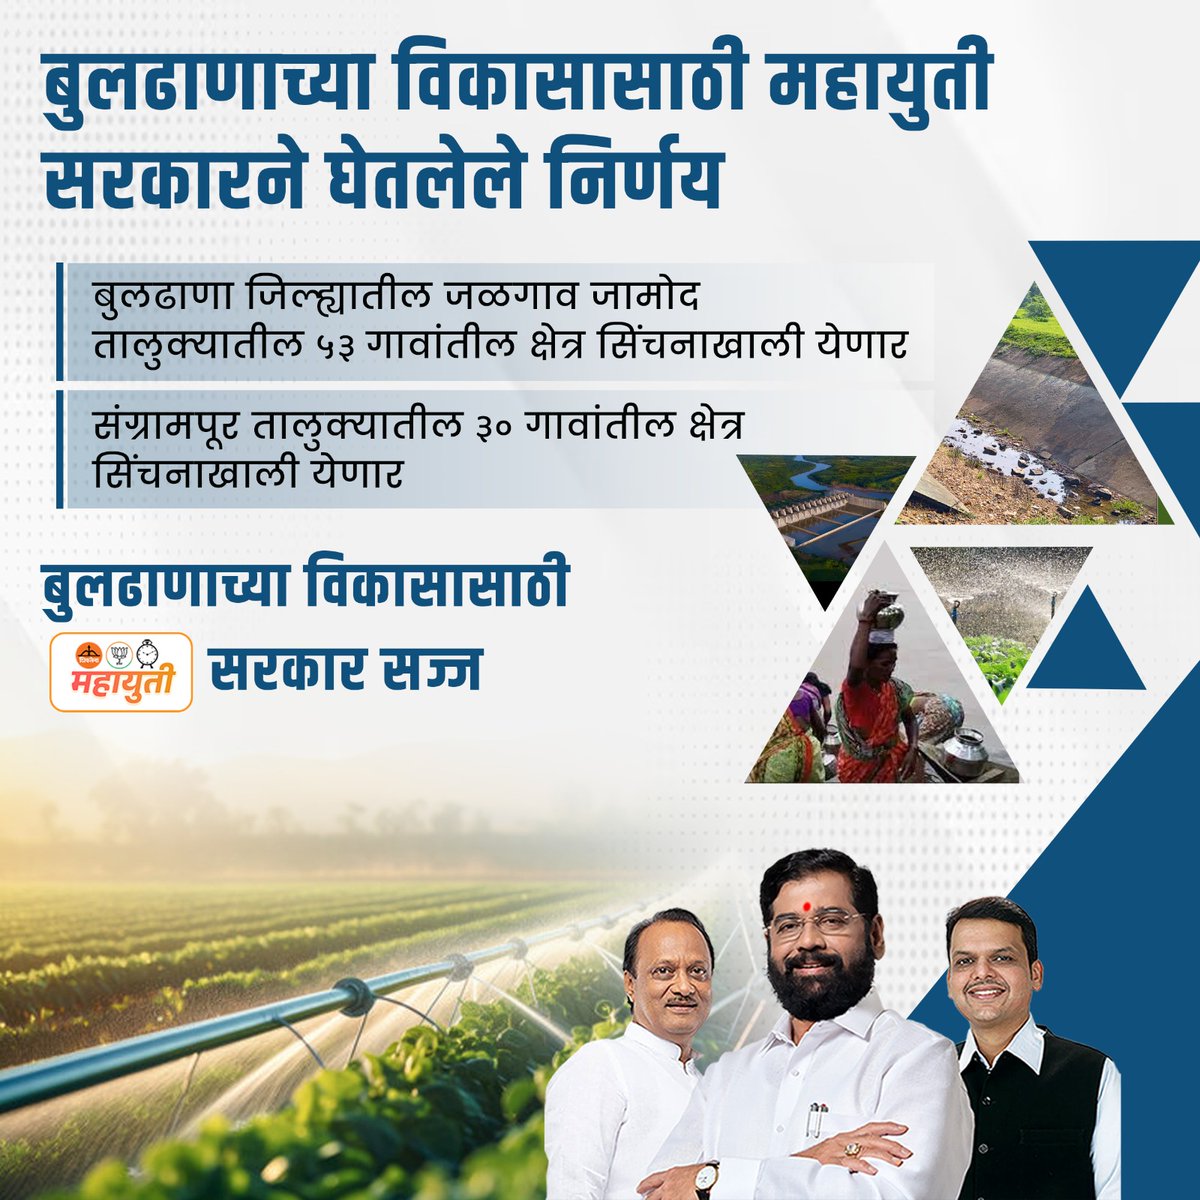 Agricultural transformation underway in Buldhana thanks to the Mahayuti government's visionary decisions! By expanding irrigation to 53 villages in Jalgaon Jamod and 30 villages in Sangrampur talukas, CM Eknath Shinde's administration is driving inclusive growth and prosperity.